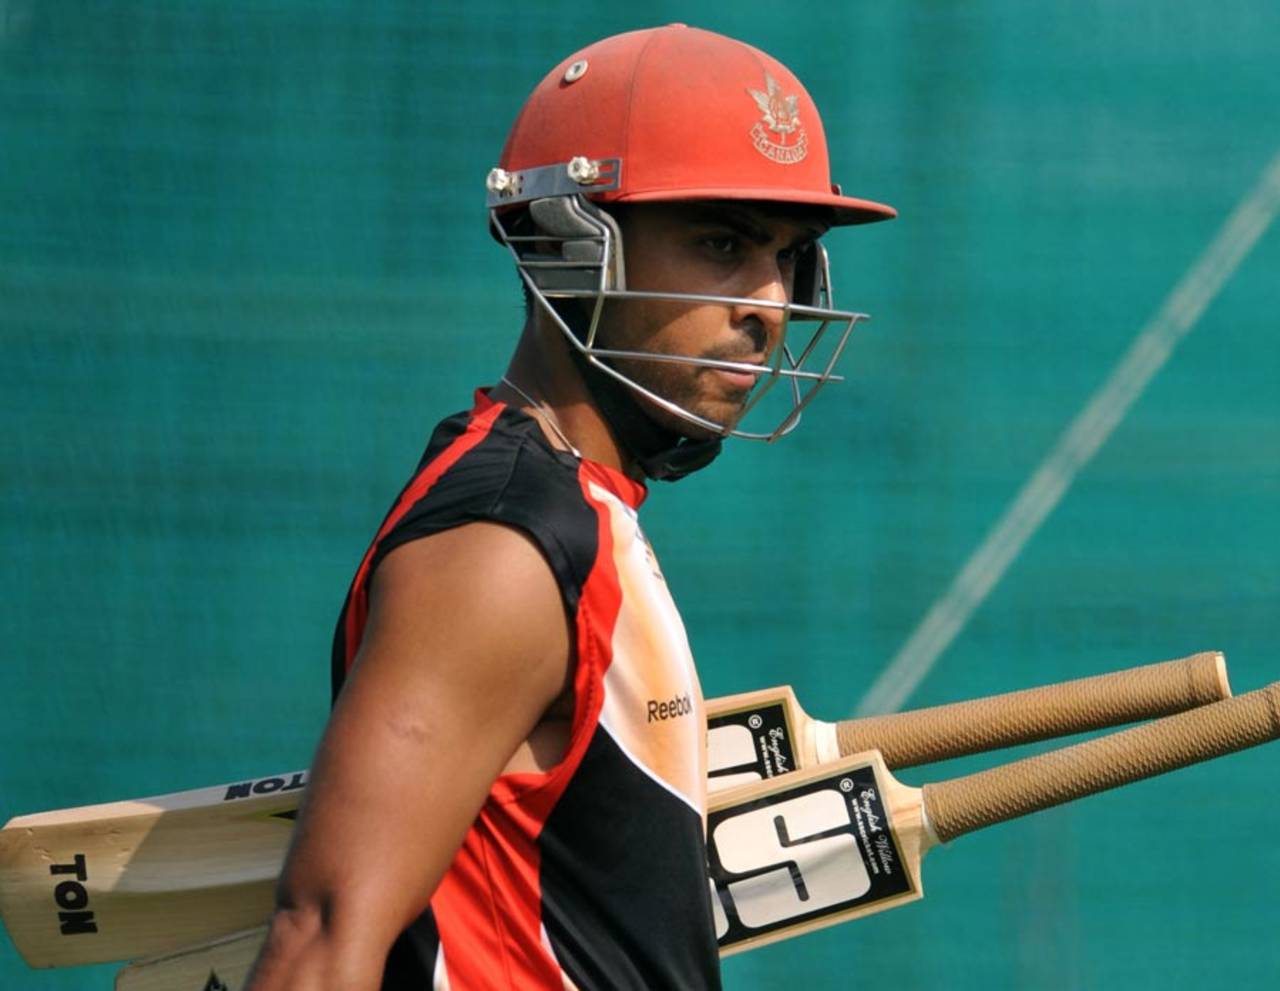 Canada's captain Ashish Bagai during a training session, Nagpur, ICC World Cup, February 27, 2011